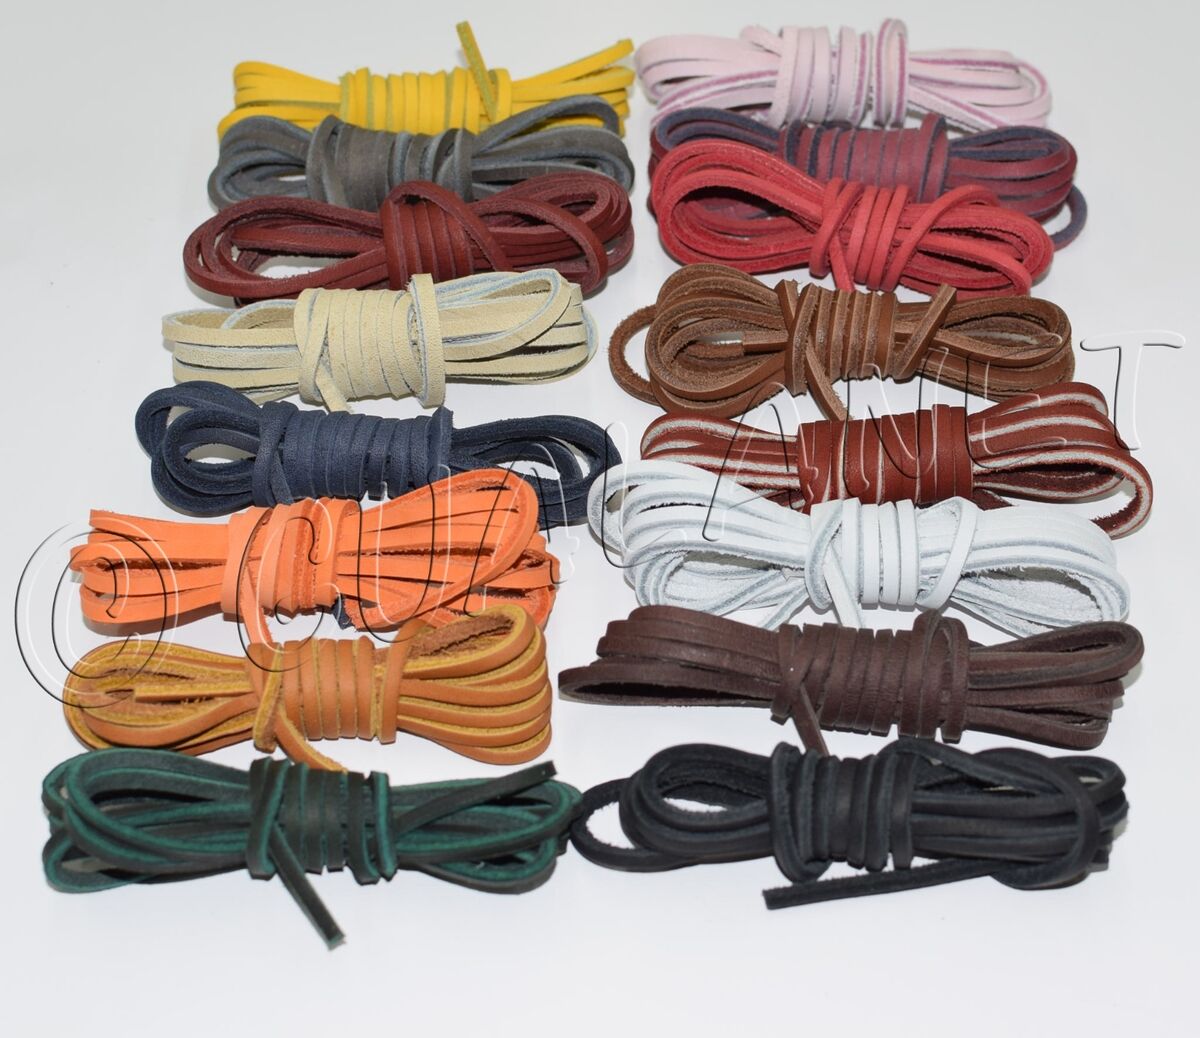 Rawhide Leather Shoe Laces 1/8 x 72 - Shoe & Boot Accessories 4 U